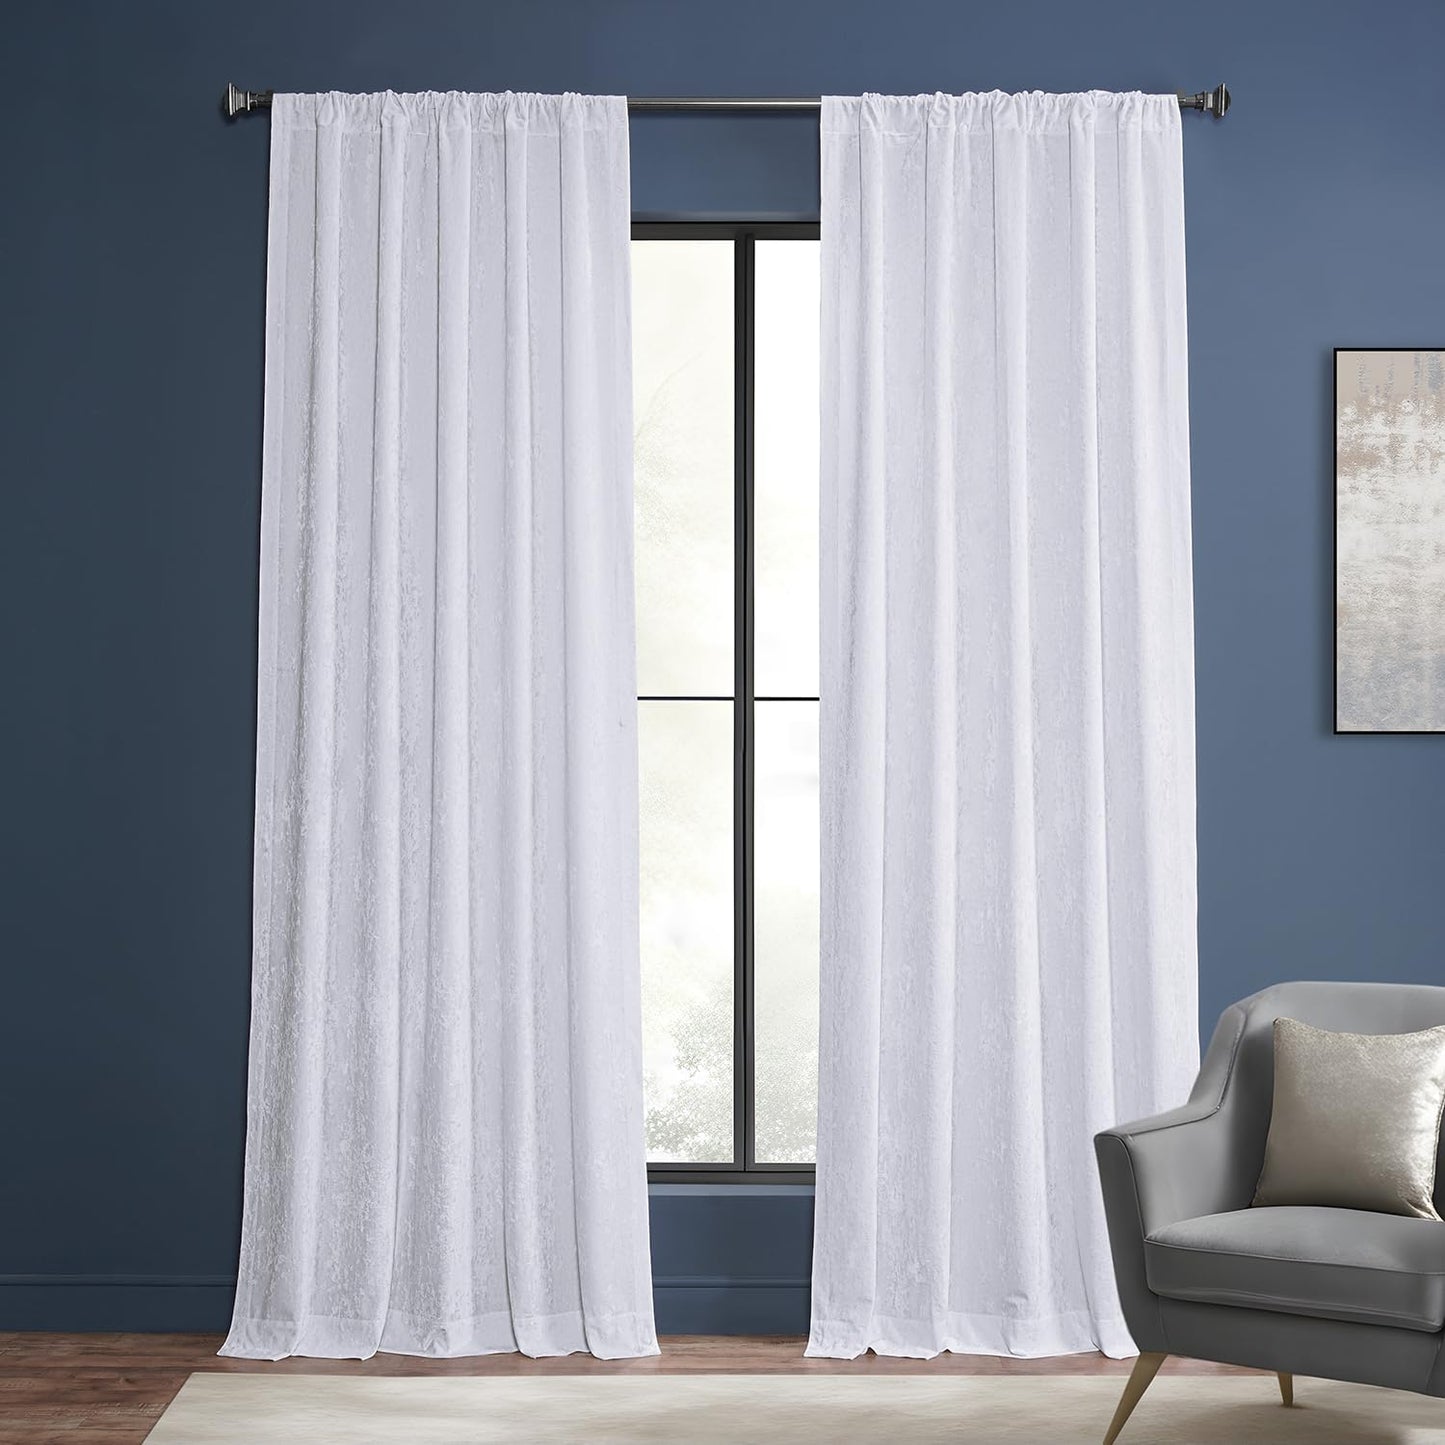 HPD Half Price Drapes Lush Crush Velvet Curtains - Room Darkening Curtain 96 Inches Long for Bedroom & Living Room, Luxury Look, Rod Pocket Design, (1 Panel), 50W X 96L, Taupe  Exclusive Fabrics & Furnishings Pearl White 50W X 108L 